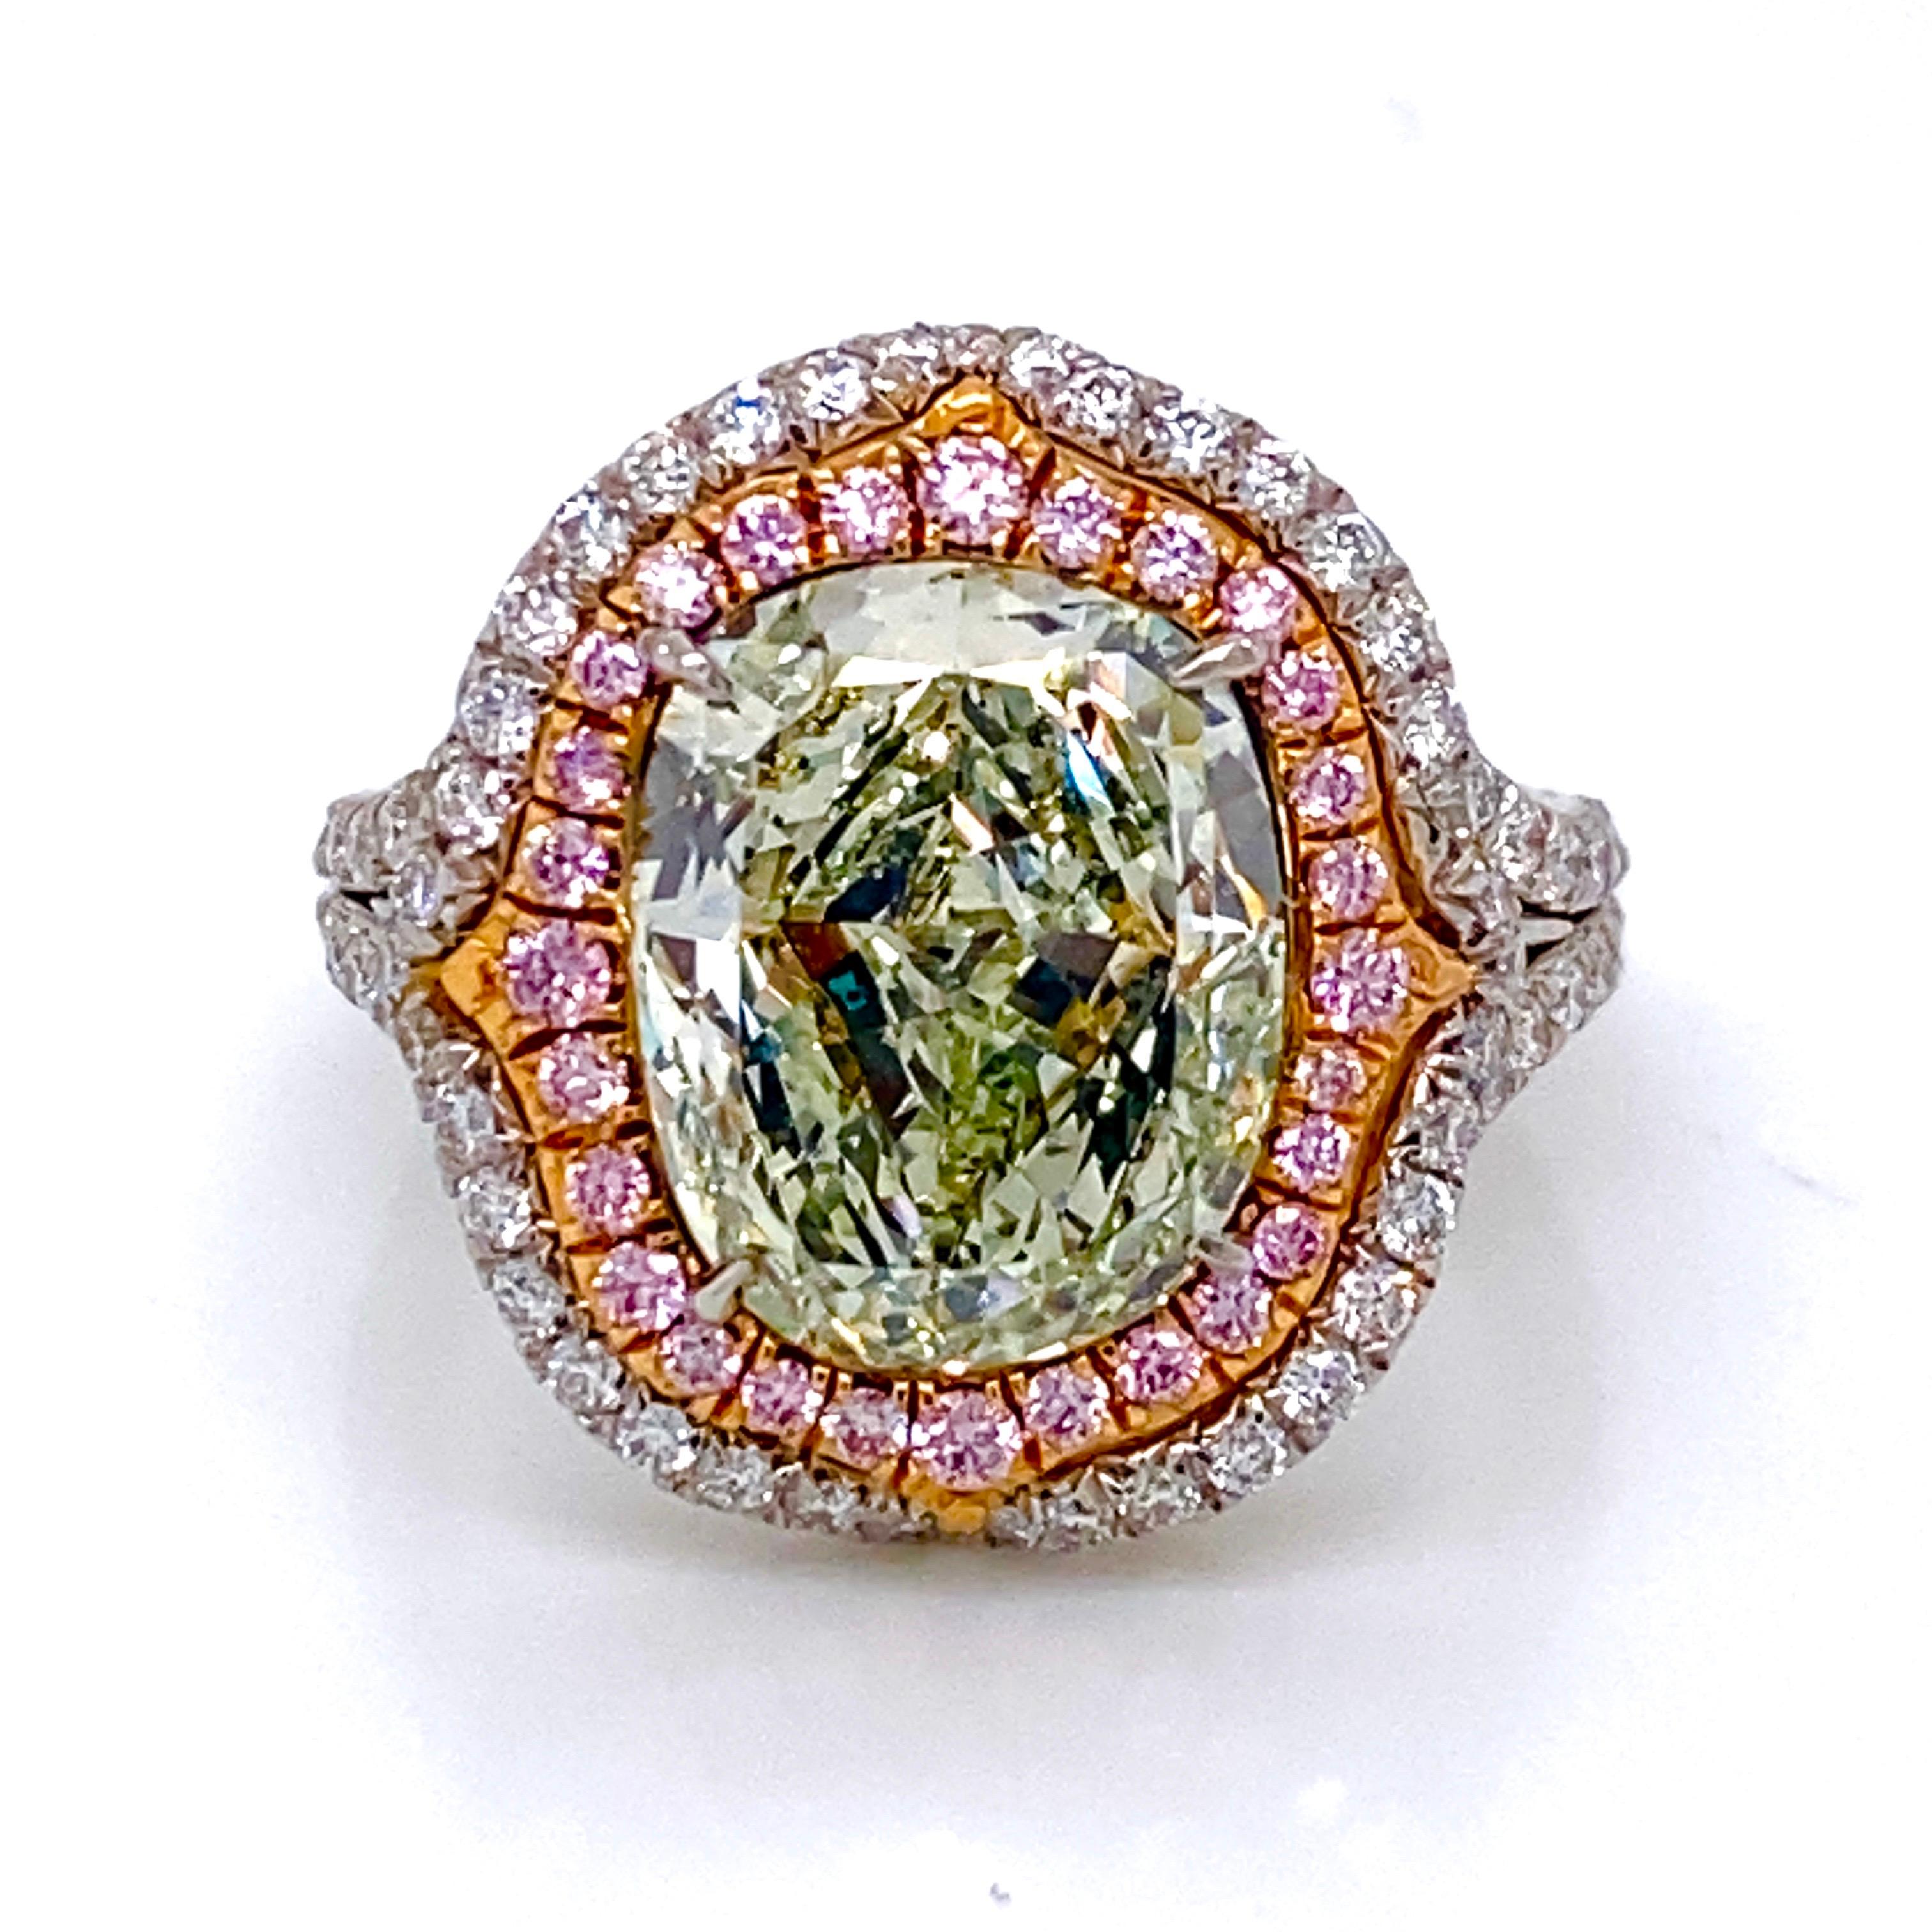 From the Emilio Jewelry Museum Vault, Showcasing a magnificent investment grade 4.50 carat natural fancy yellowish green diamond set in the center. A pure green diamond with no overtone would cost three times the price which is why this ring is a